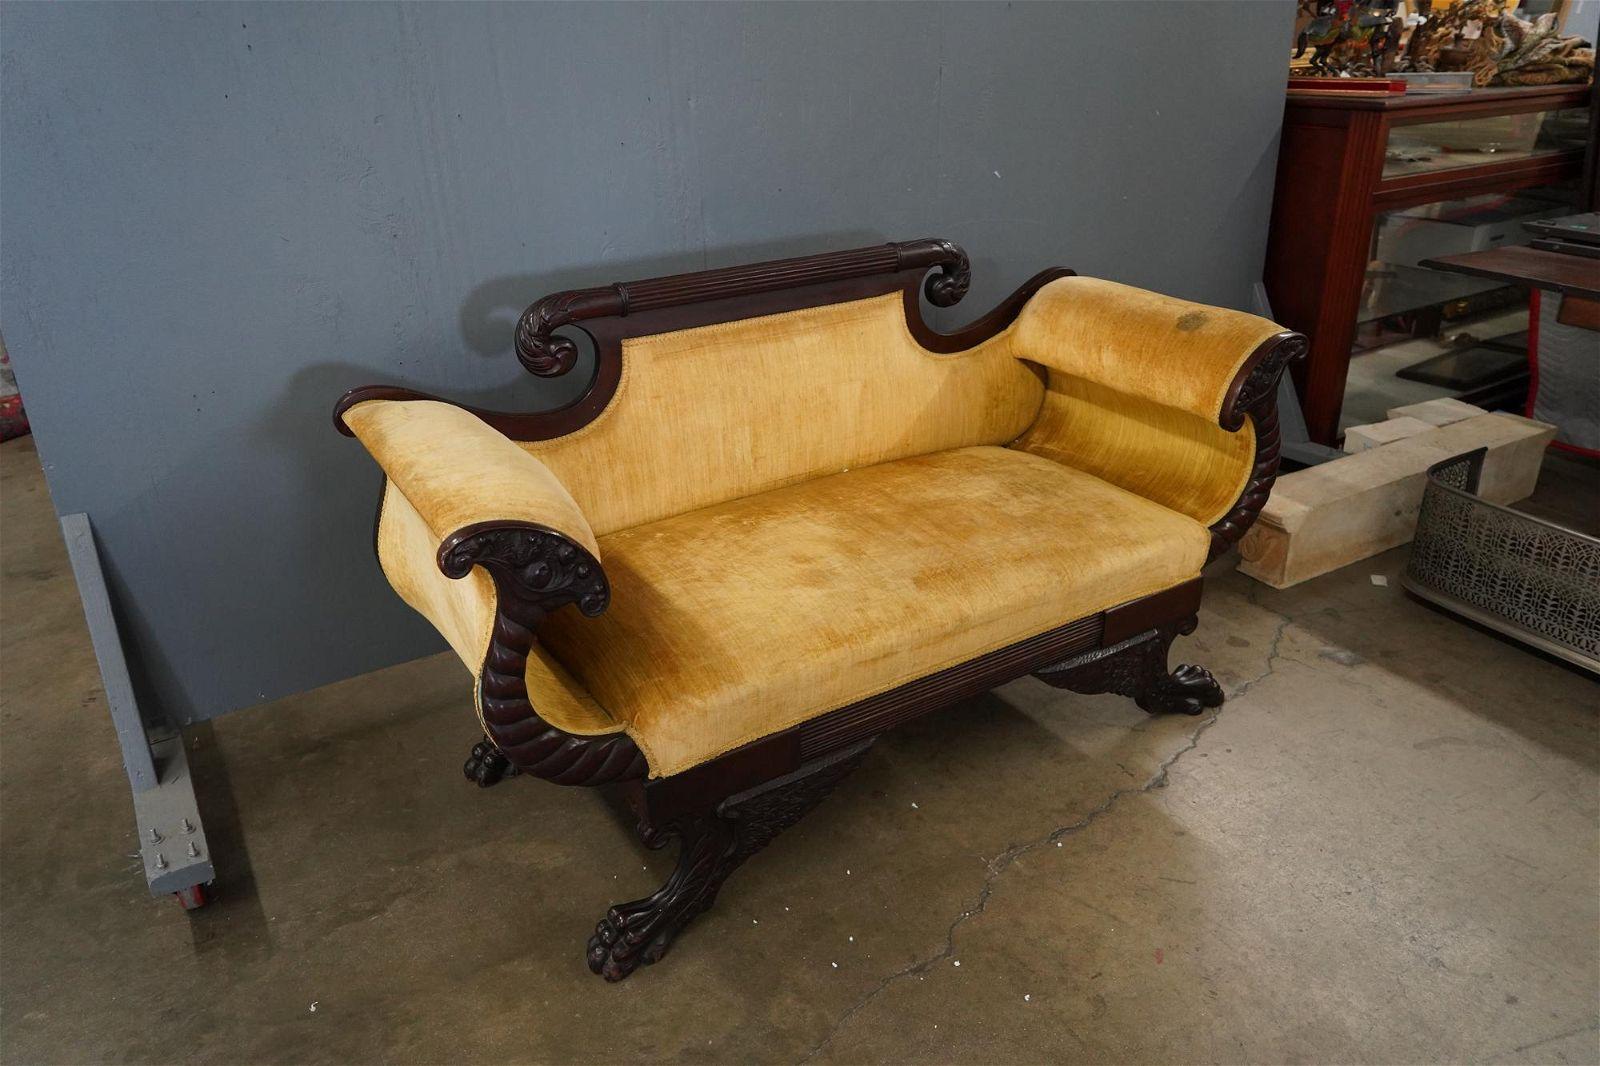 Circa 1800 American Federal highly carved mahogany sofa with scrolled carved headrest, curvelinear arms and outswept hairy paw feet upholstered in a vintage old striated velvet fabric